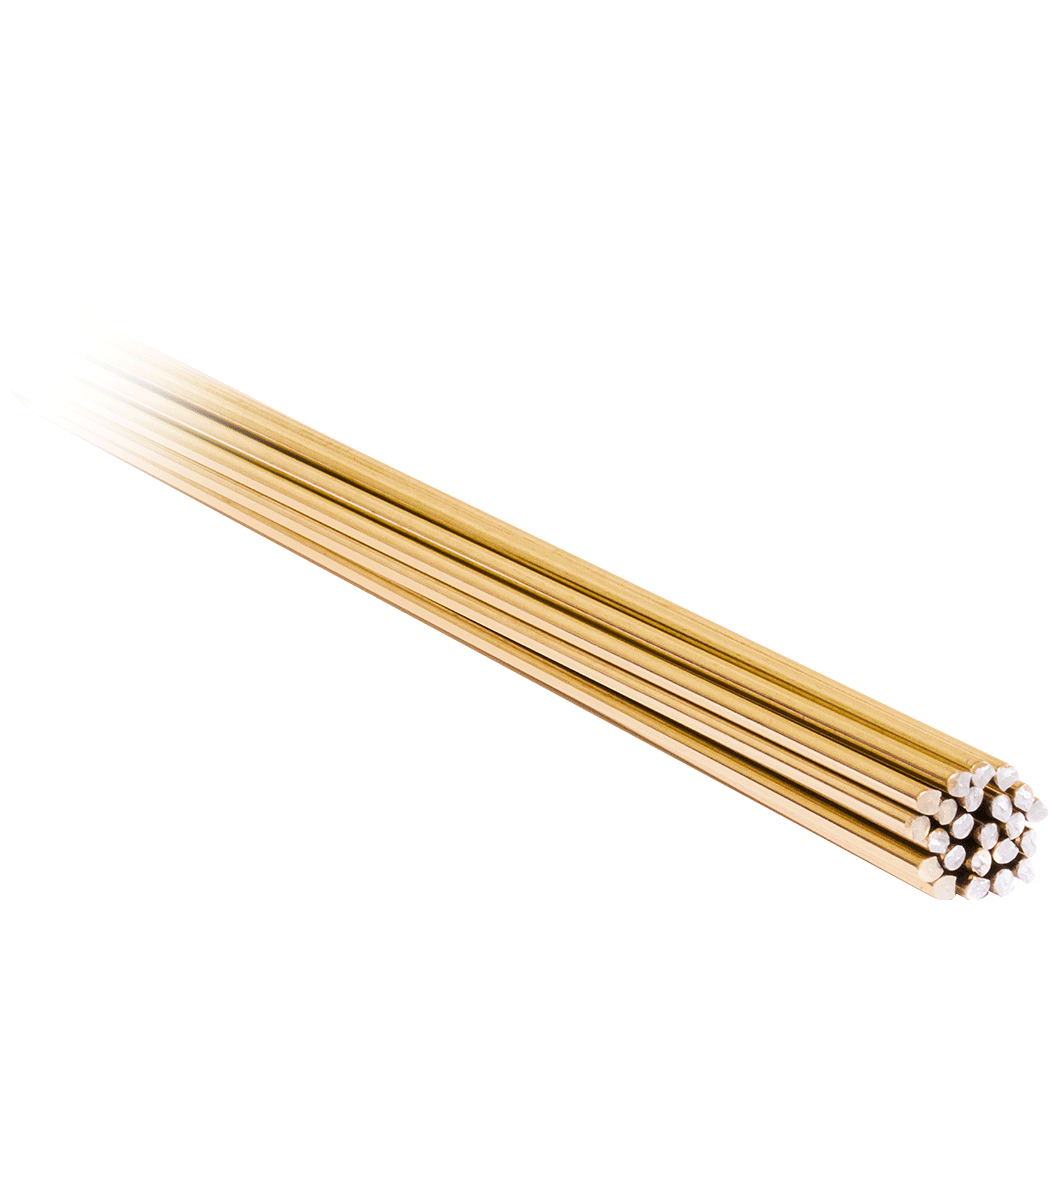 Wesbite Name: 15% Silver Brazing Rods